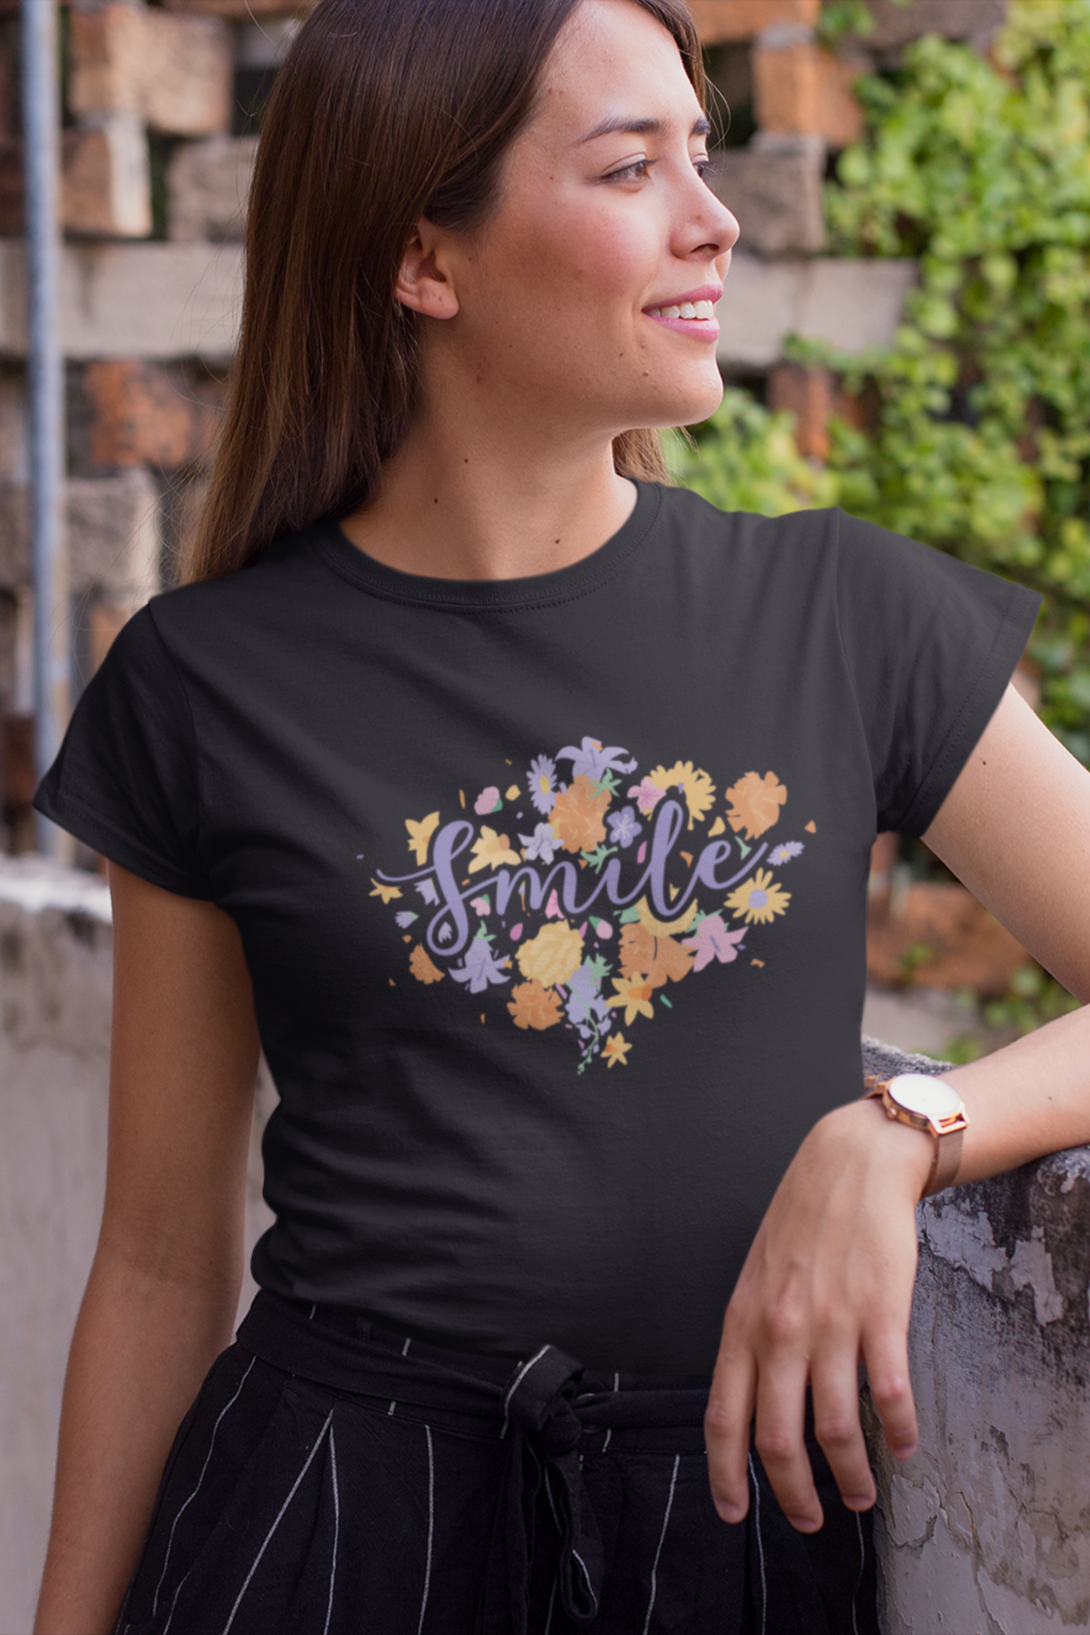 Floral Smile Printed T-Shirt For Women - WowWaves - 3